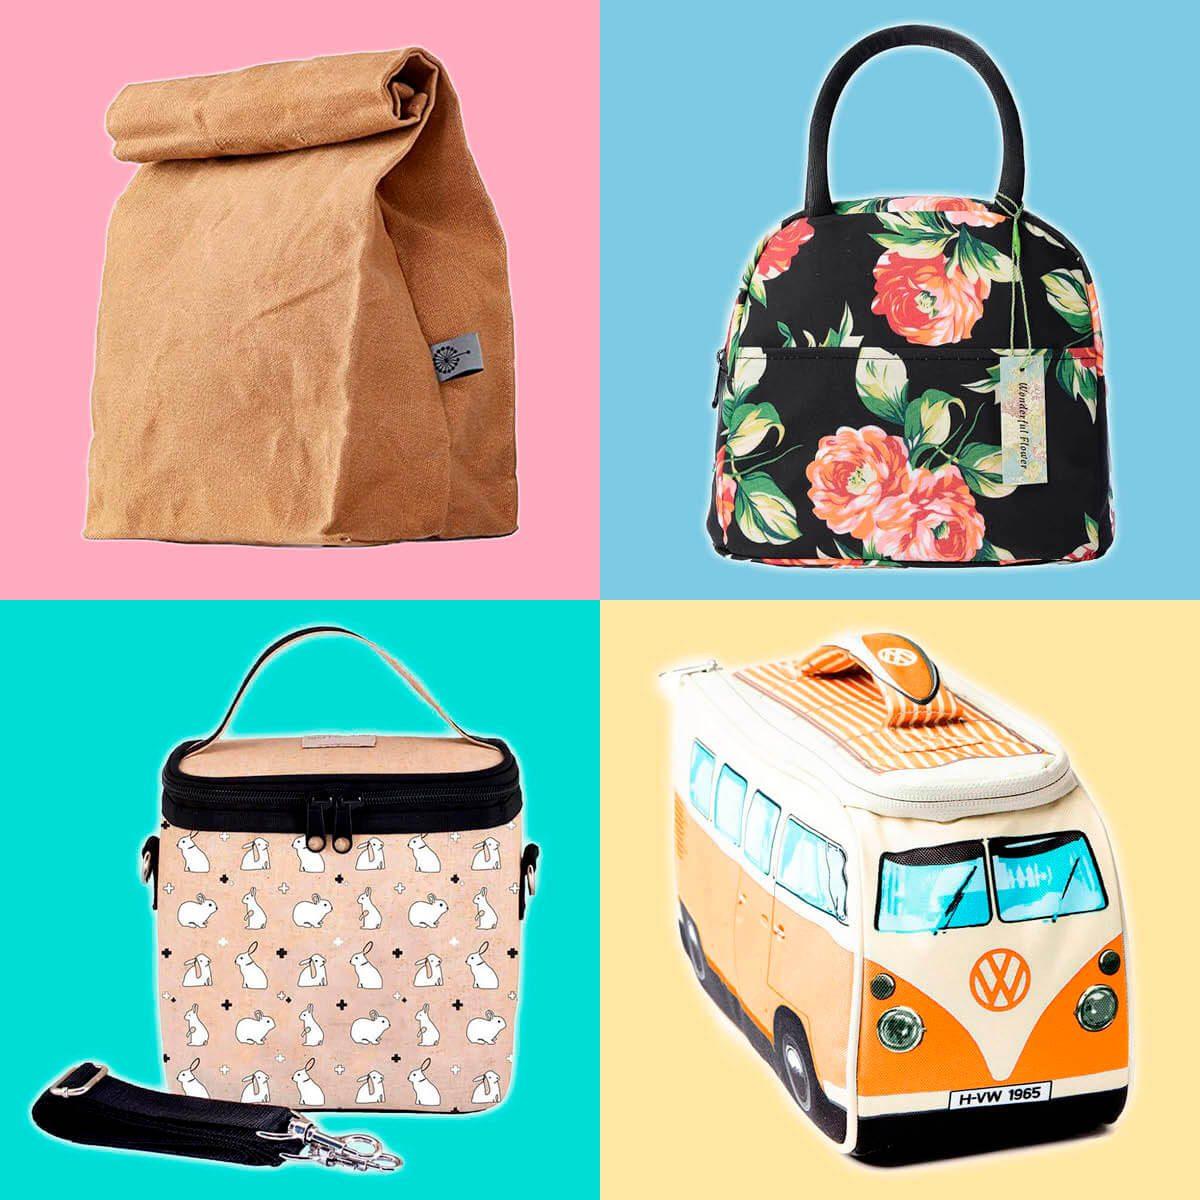 15 Clever and Cute Lunch Boxes We Love